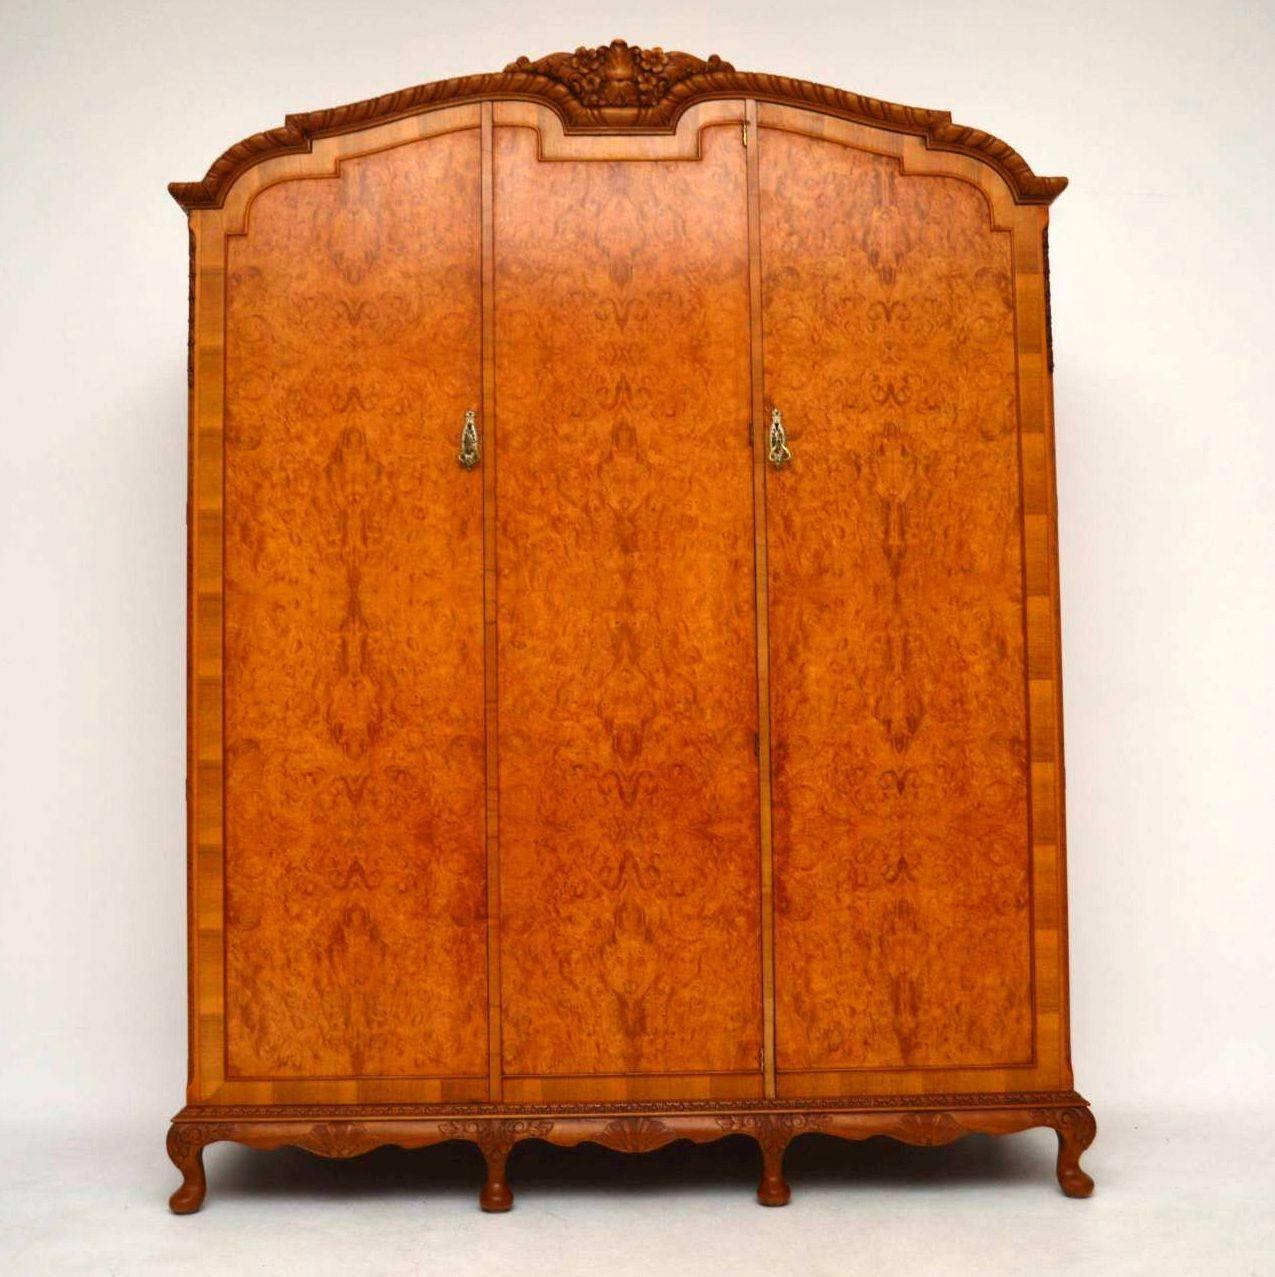 This large antique walnut wardrobe is a real stand out piece of furniture of high quality and is very practicable too. The outside is composed of three burr walnut doors sitting on a shaped carved base with carved shaped legs. The top cornice is